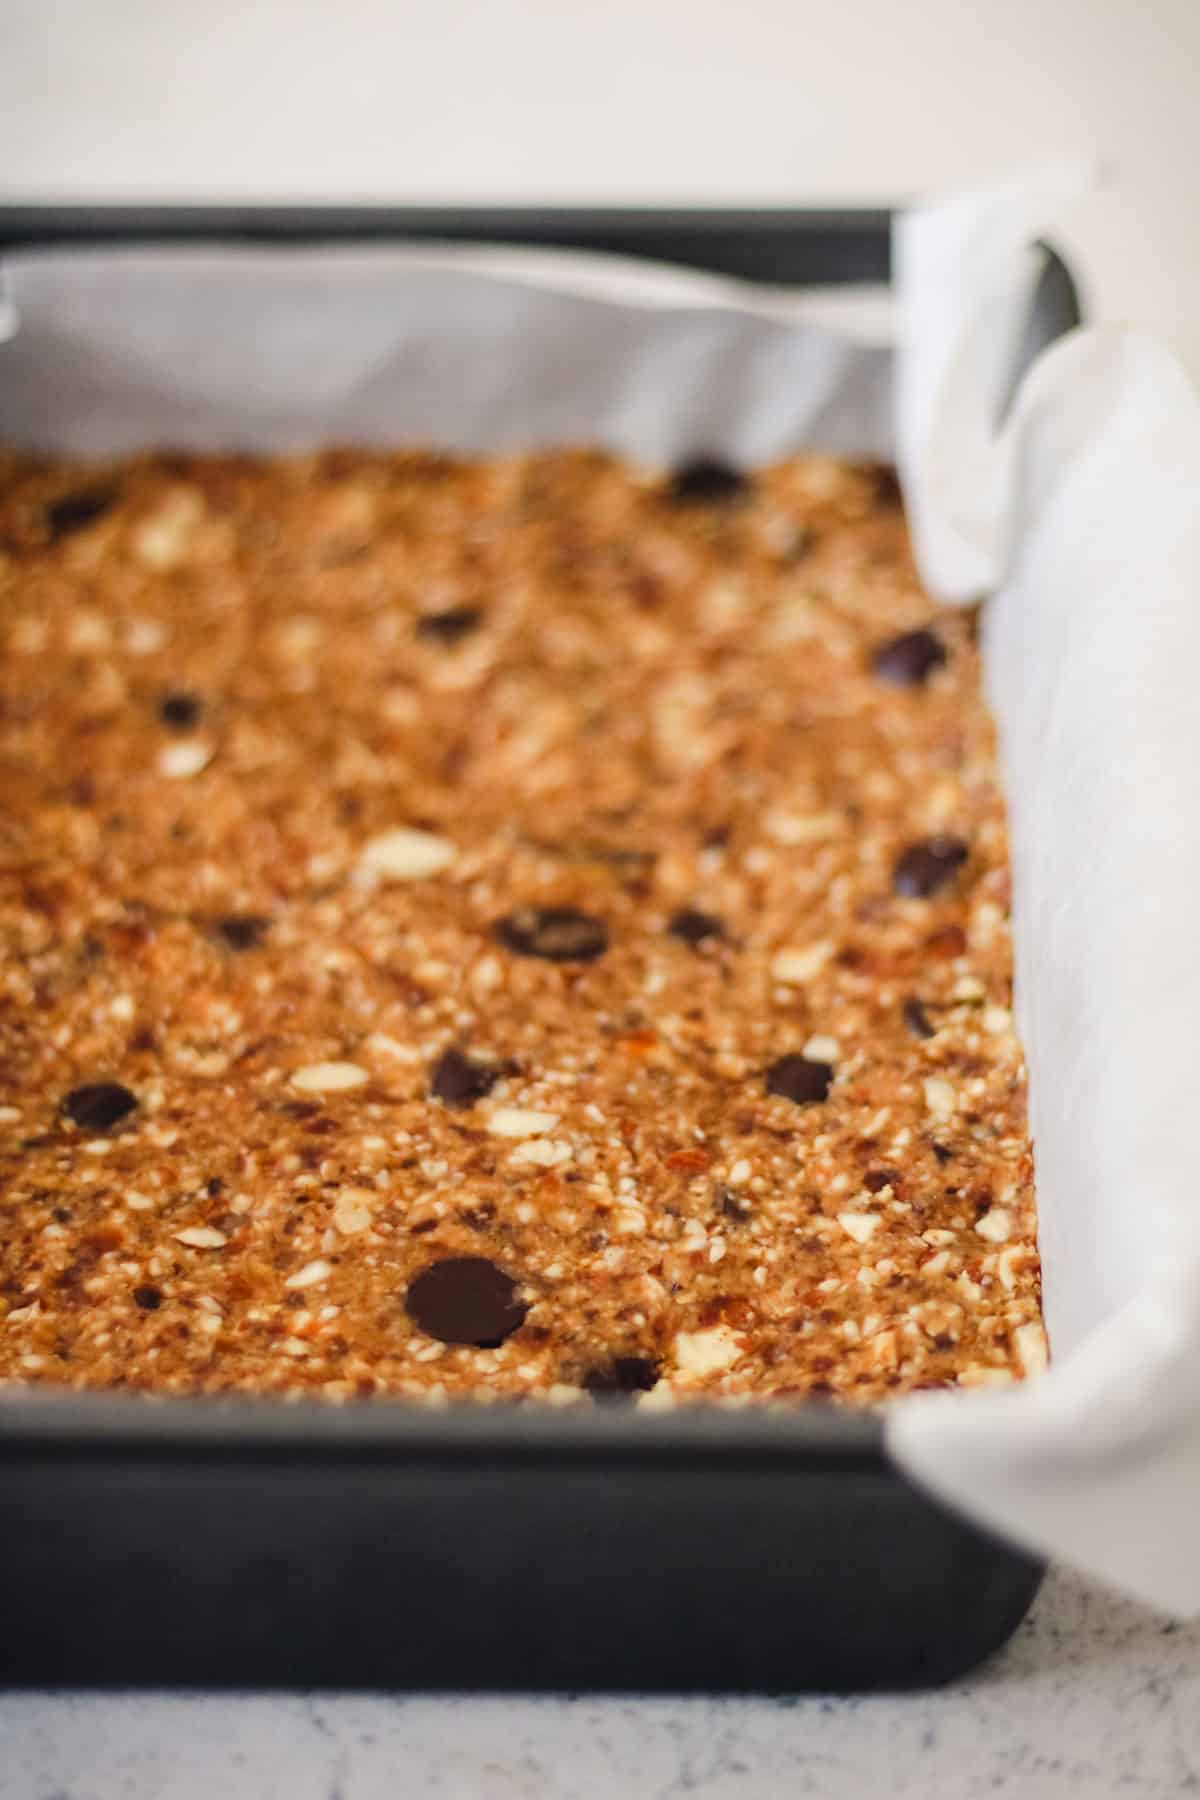 Homemade no-bake energy bars squeezed into a baking dish.